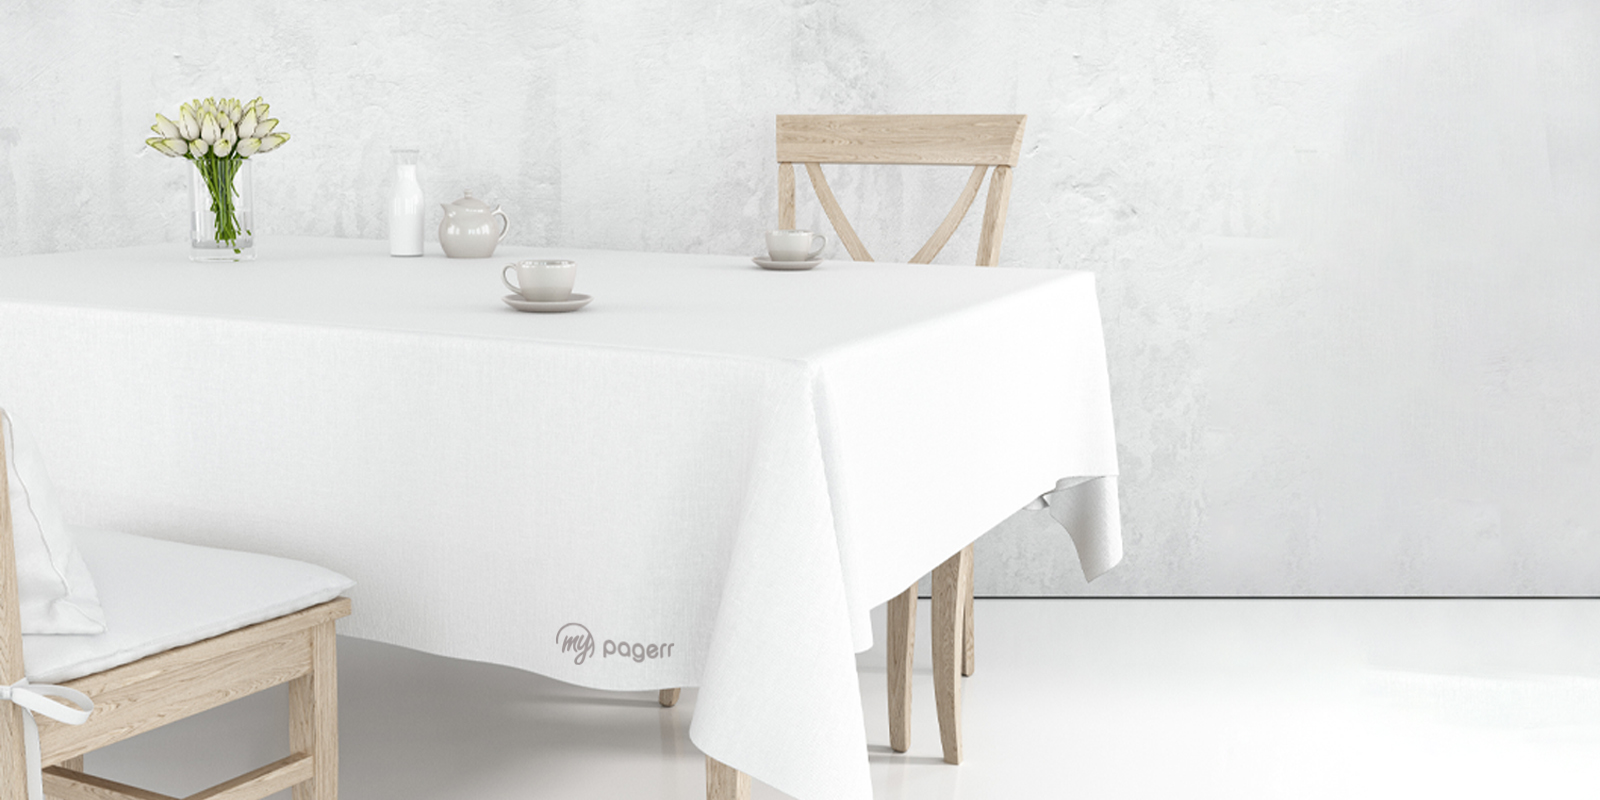 Tablecloths in Barcelona - Print with Pagerr